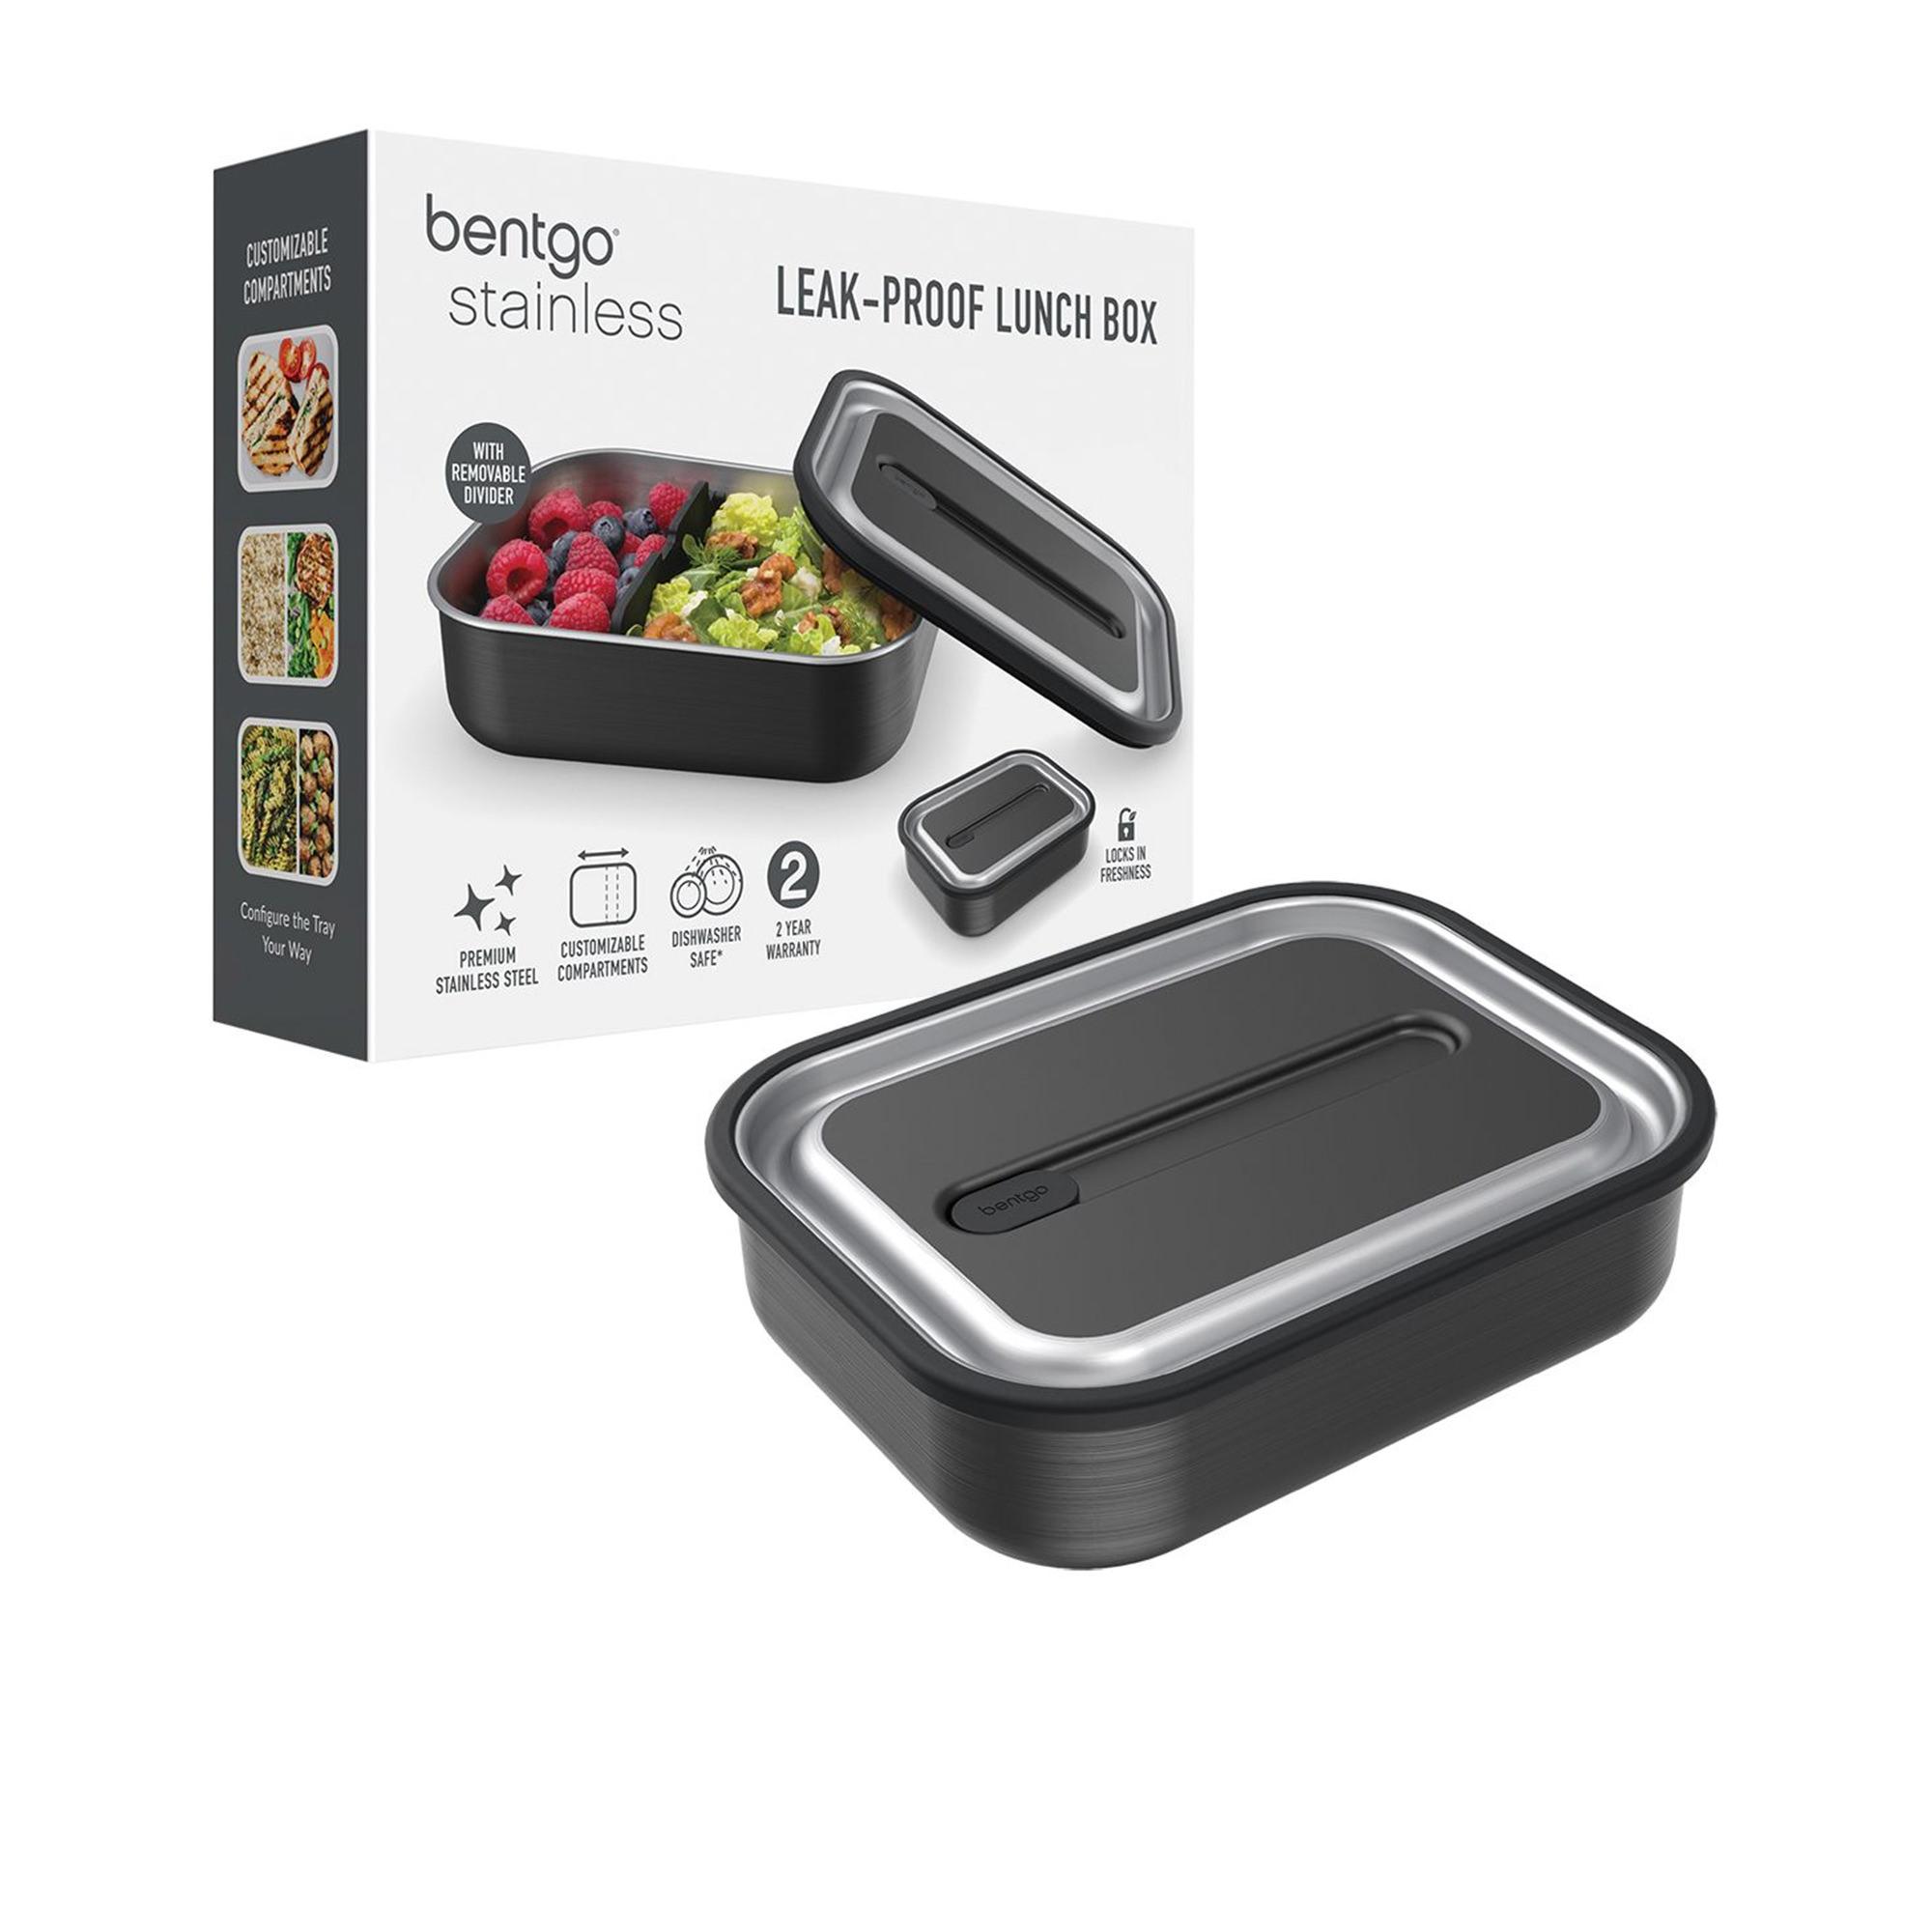 Bentgo Stainless Steel Leak Proof Lunch Box 1.2L Carbon Black Image 5